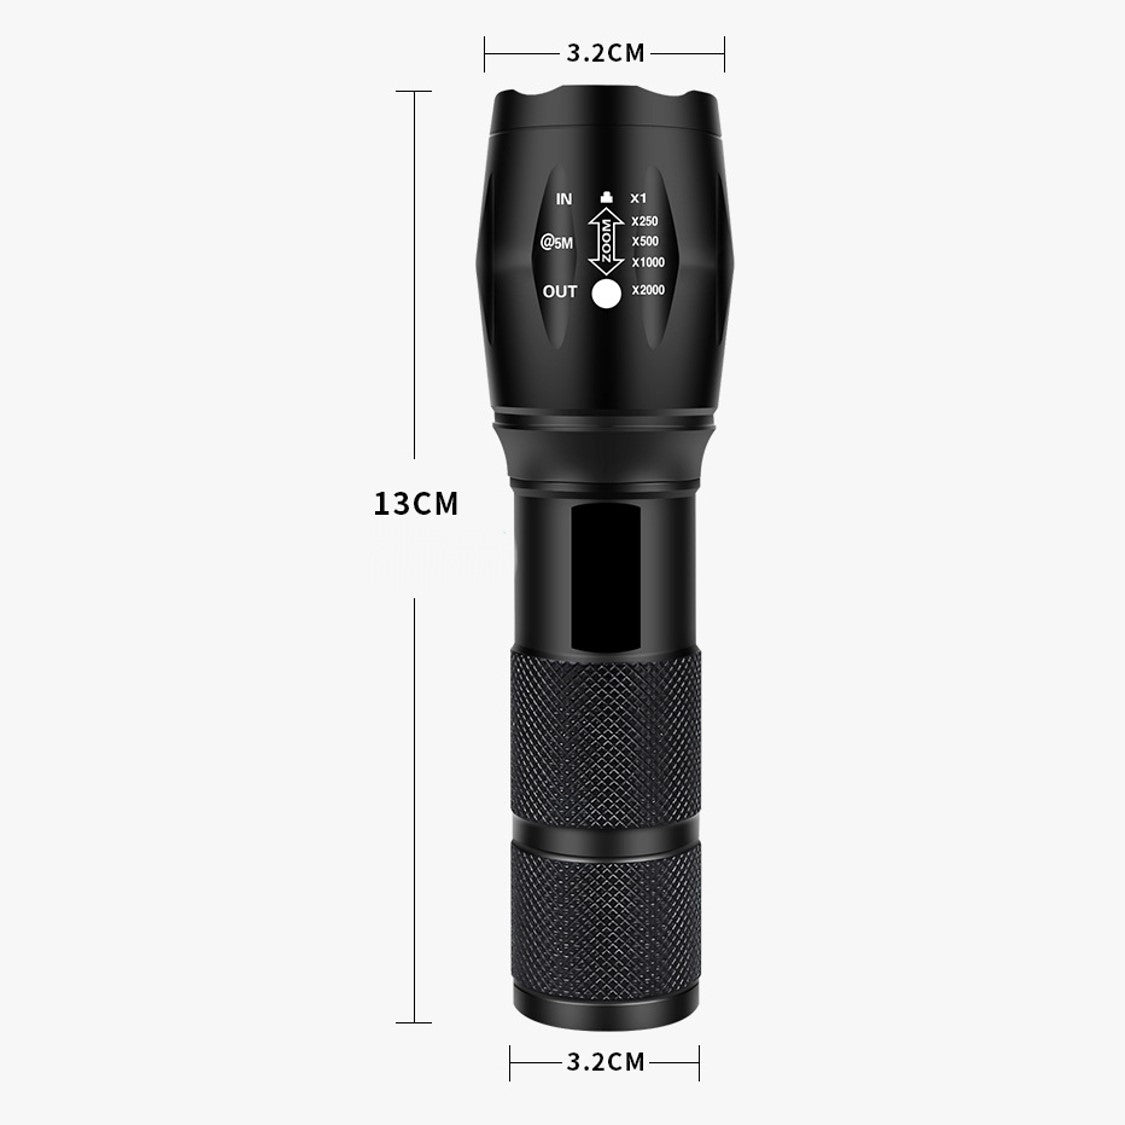 Zoomable T6 LED Torch light